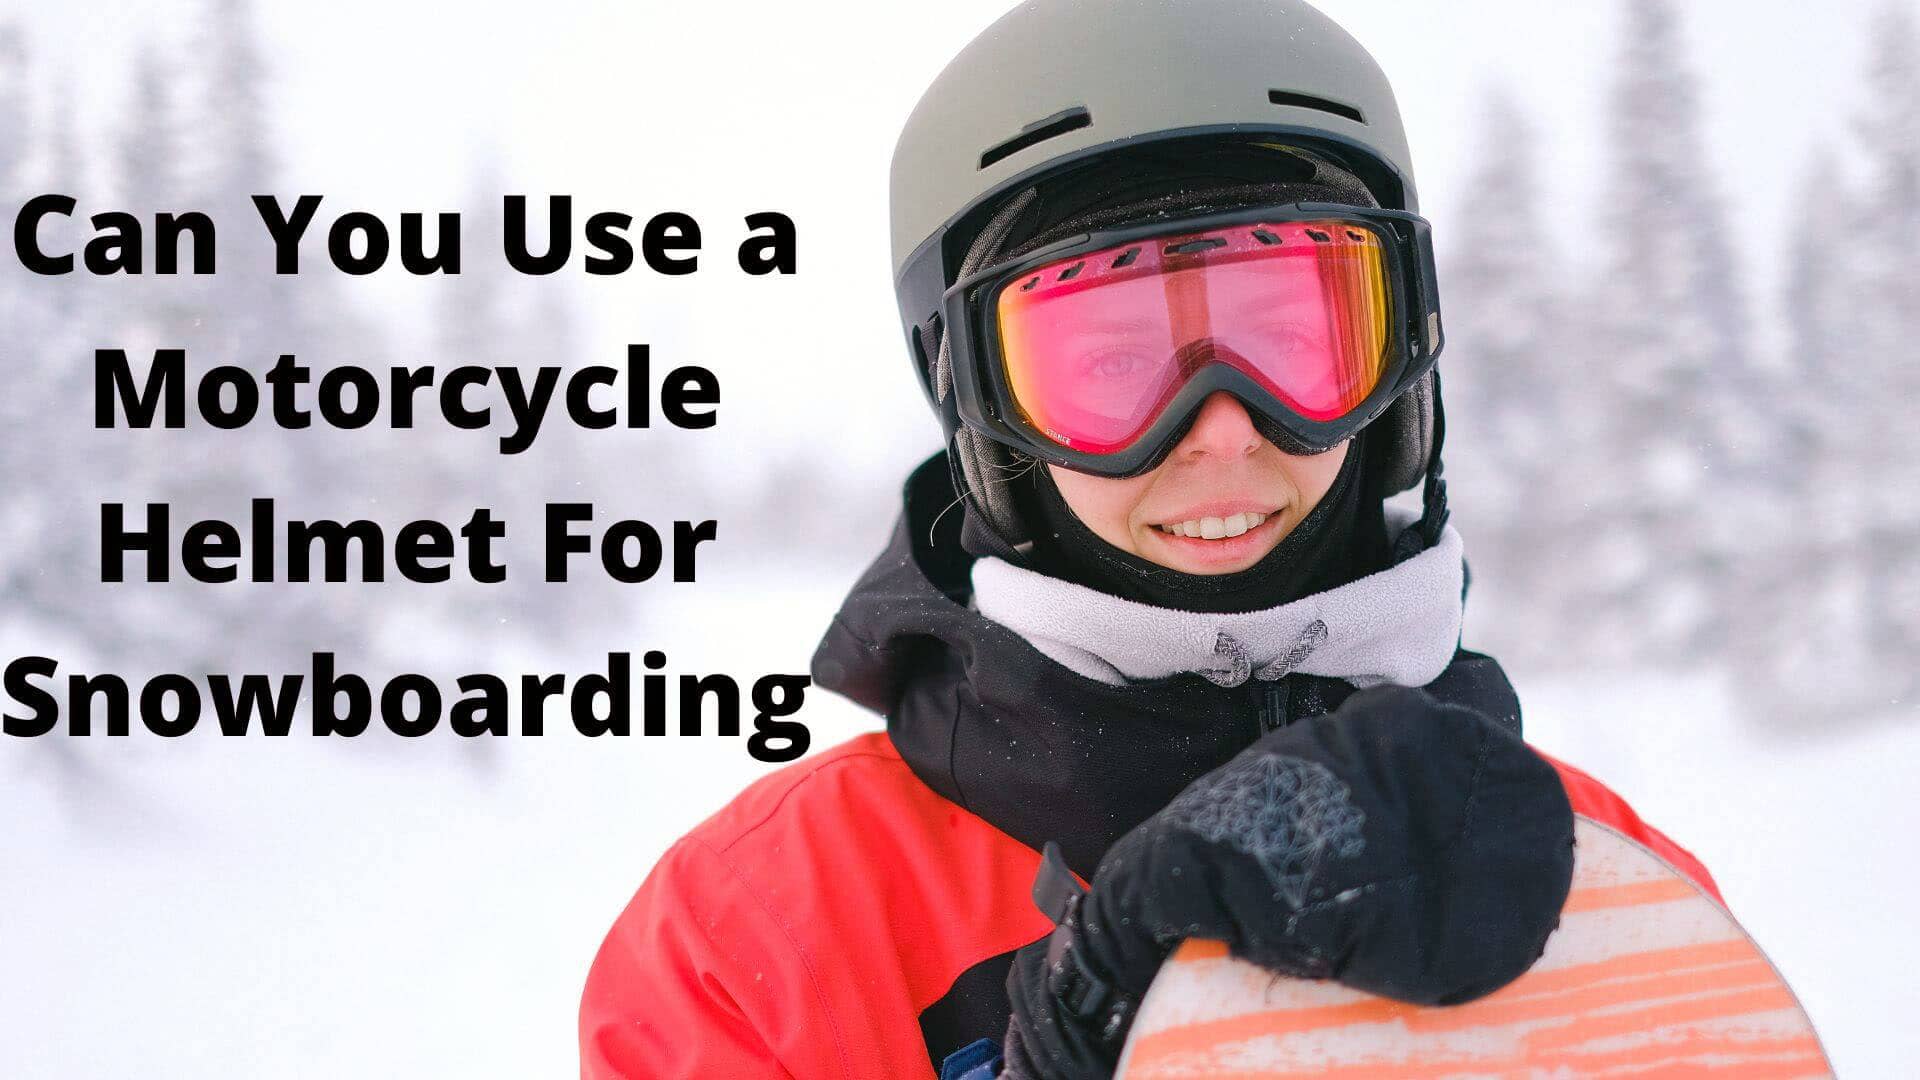 Can You Use a Motorcycle Helmet For Snowboarding?